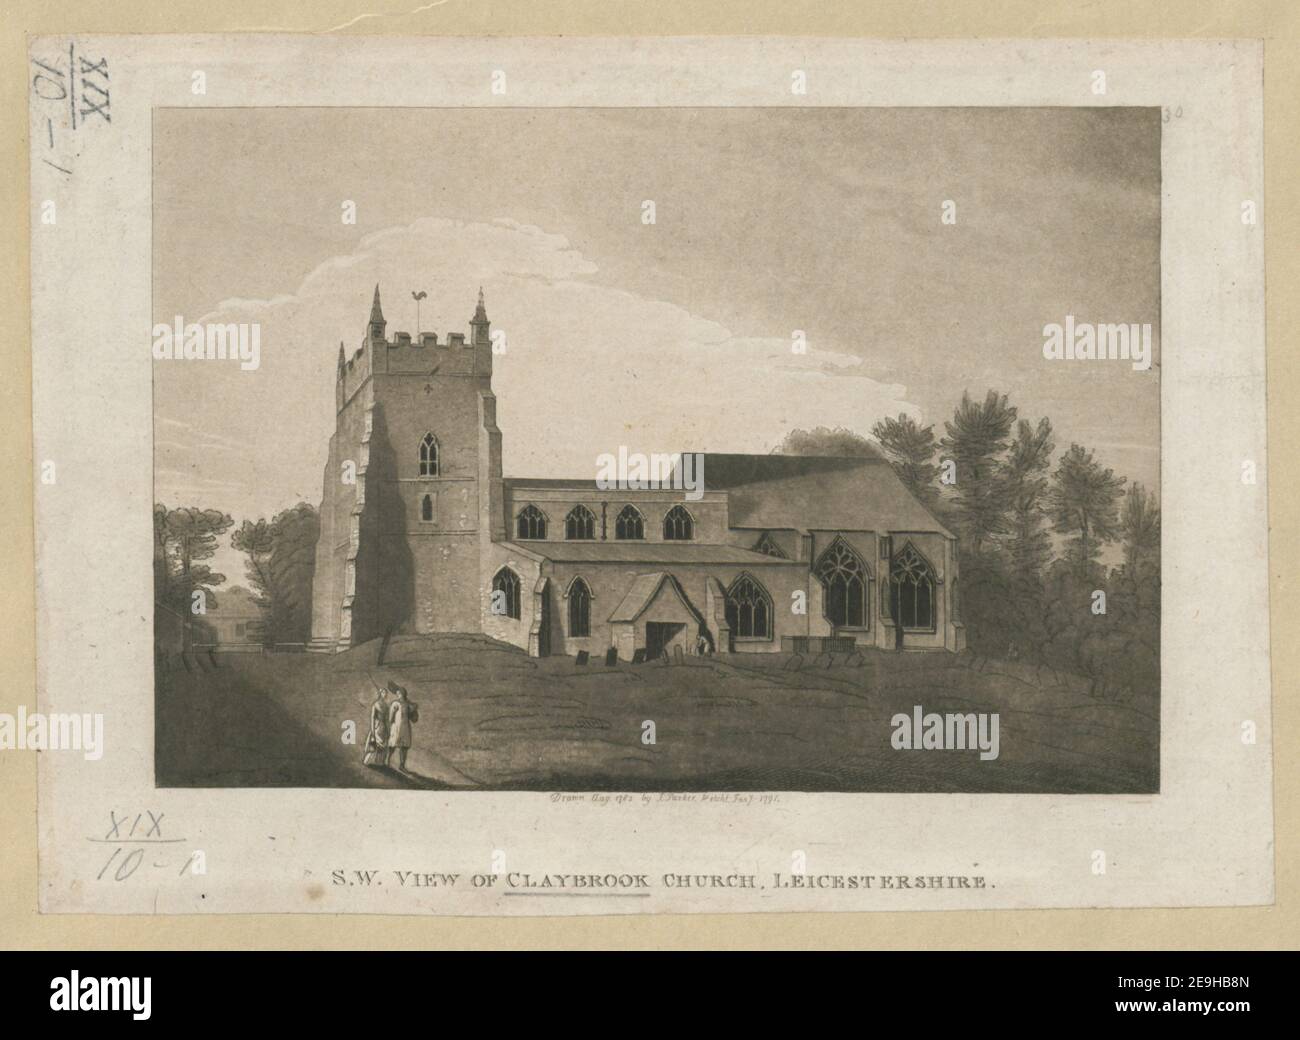 S.W. View of Claybrook Church, Leicestershire.  Author  Parker, James 19.10.1. Place of publication: [London] Publisher: [J. Nichols]., Date of publication: [1791 c.]  Item type: 1 print Medium: etching and aquatint Dimensions: sheet 13.4 x 18.9 cm [trimmed within platemark]  Former owner: George III, King of Great Britain, 1738-1820 Stock Photo